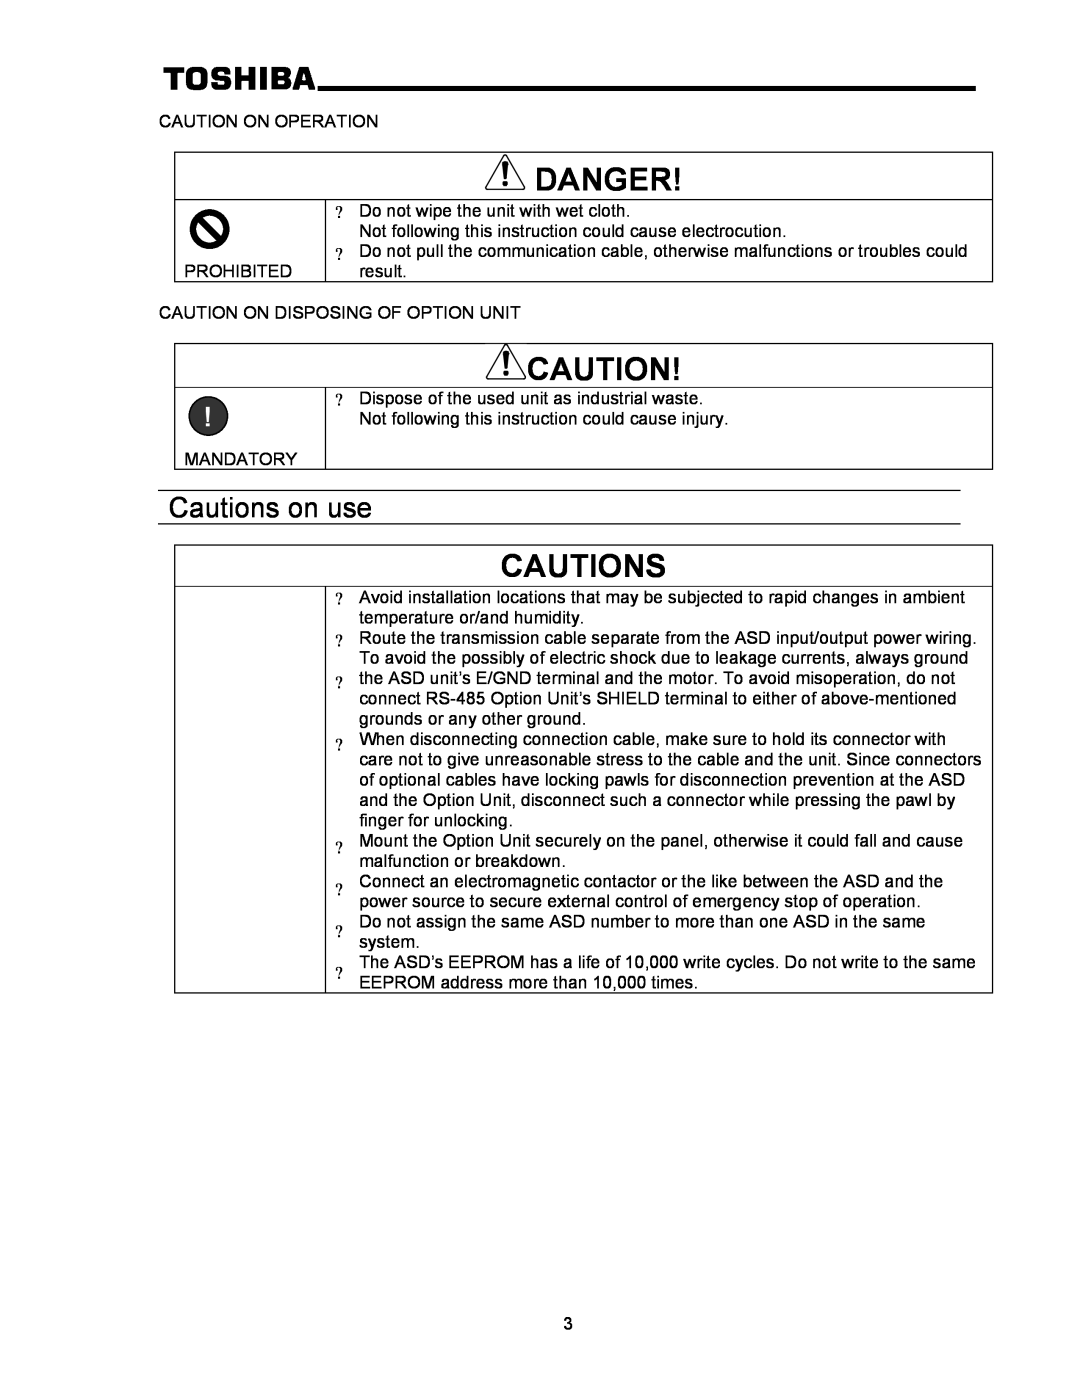 Toshiba RS-485 operation manual Cautions on use, Danger 